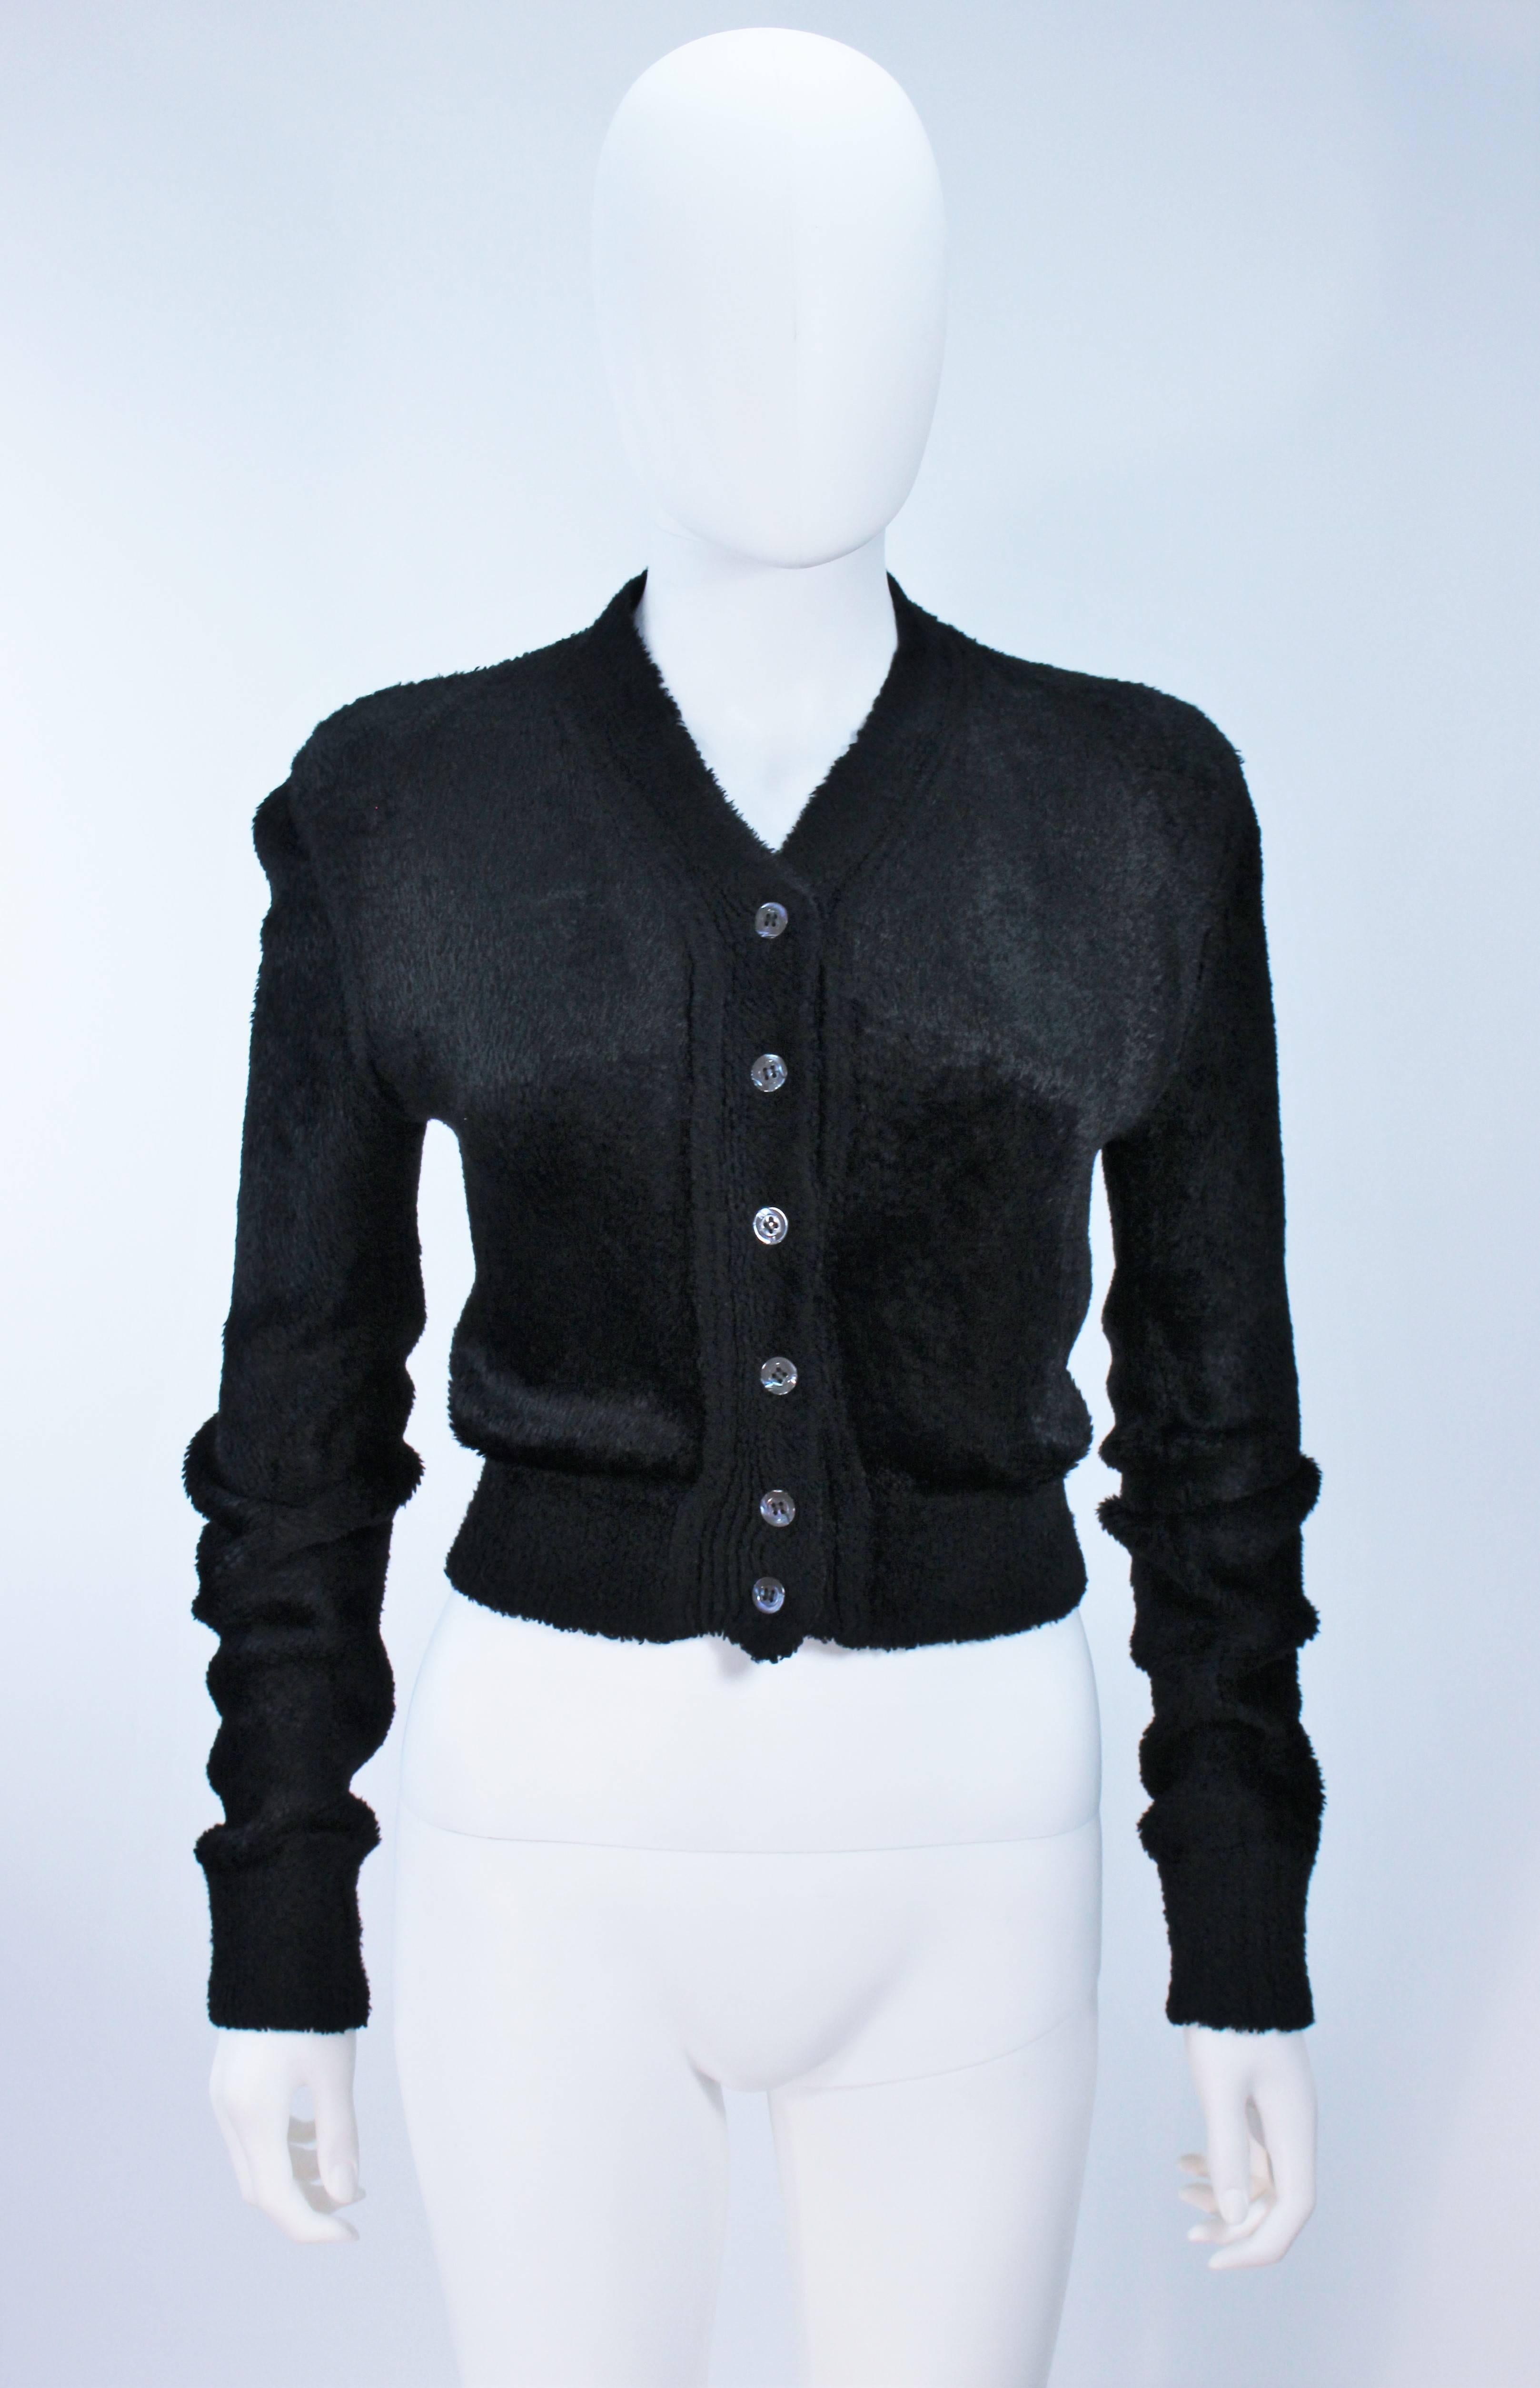  This Alaia  vintage sweater is composed of a very supple black fuzzy stretch material (viscose/rayon blend). There are center front button closures. In excellent vintage condition. 

  **Please cross-reference measurements for personal